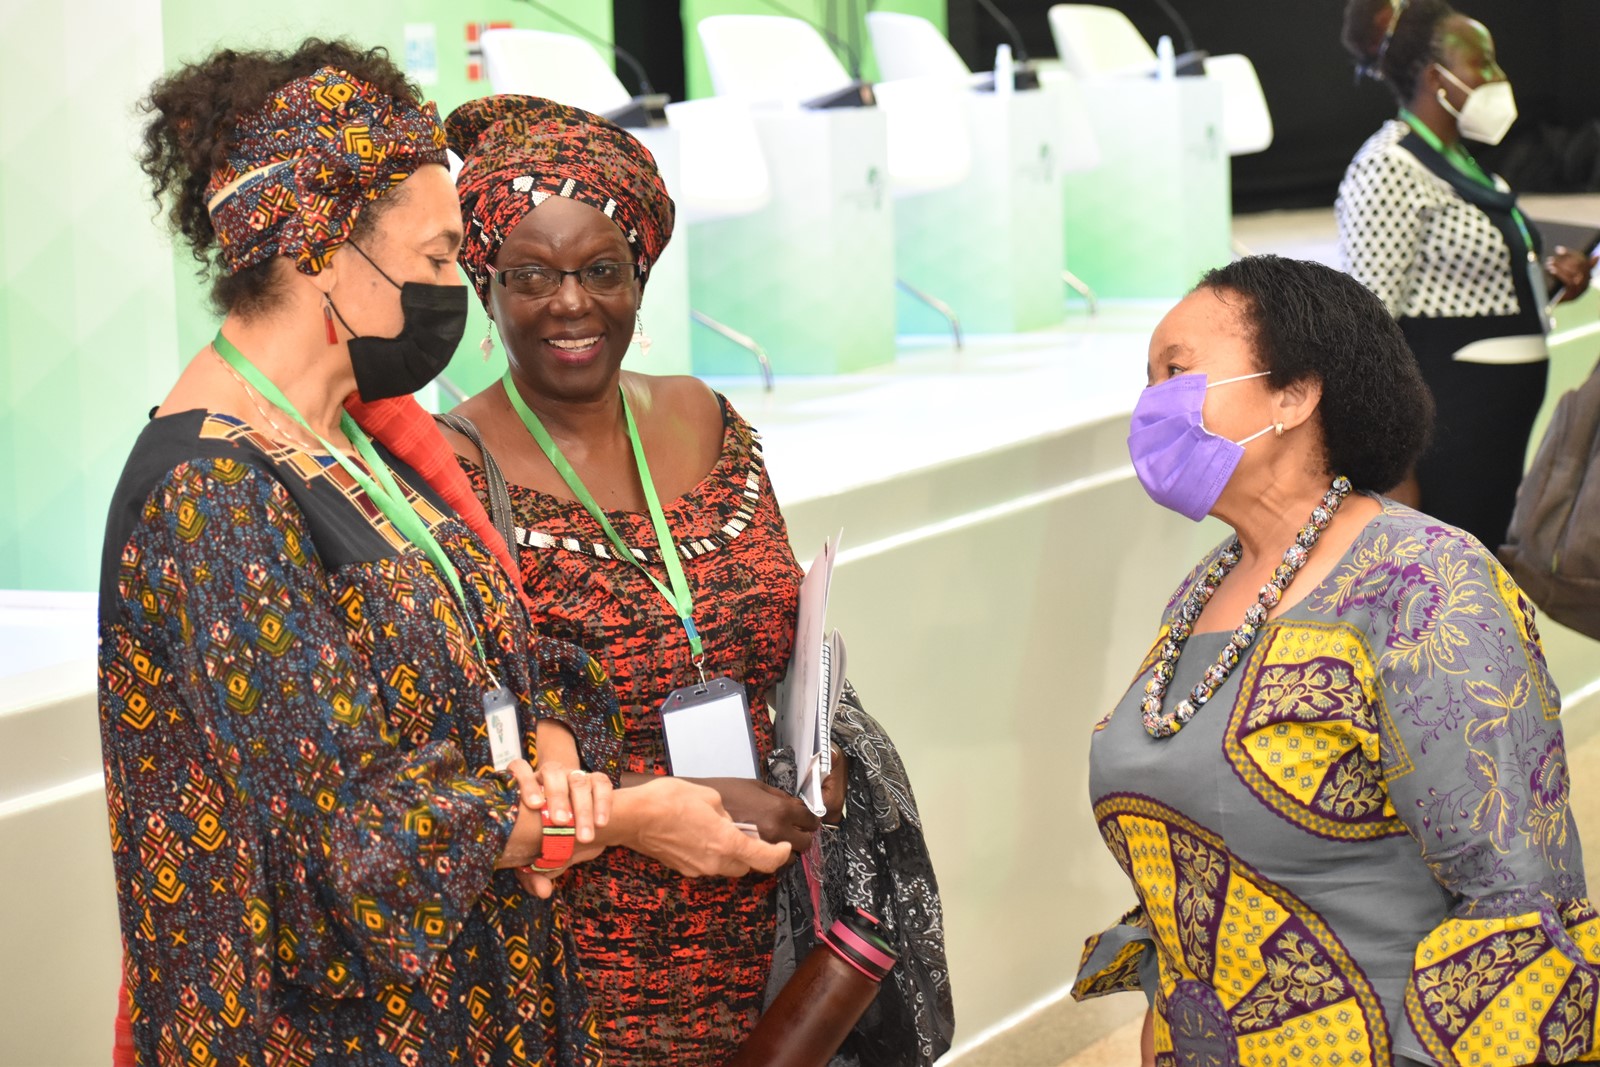 Prof. Amina Mama (L) interacts with the South African High Commissioner to Uganda, H.E. Lulama Mary-Theresa Xingwana (R) and Prof. Sylvia Tamale (C) during the ICGSA Opening Ceremony on 23rd February 2022 in the CTF2 Auditorium, Makerere University.